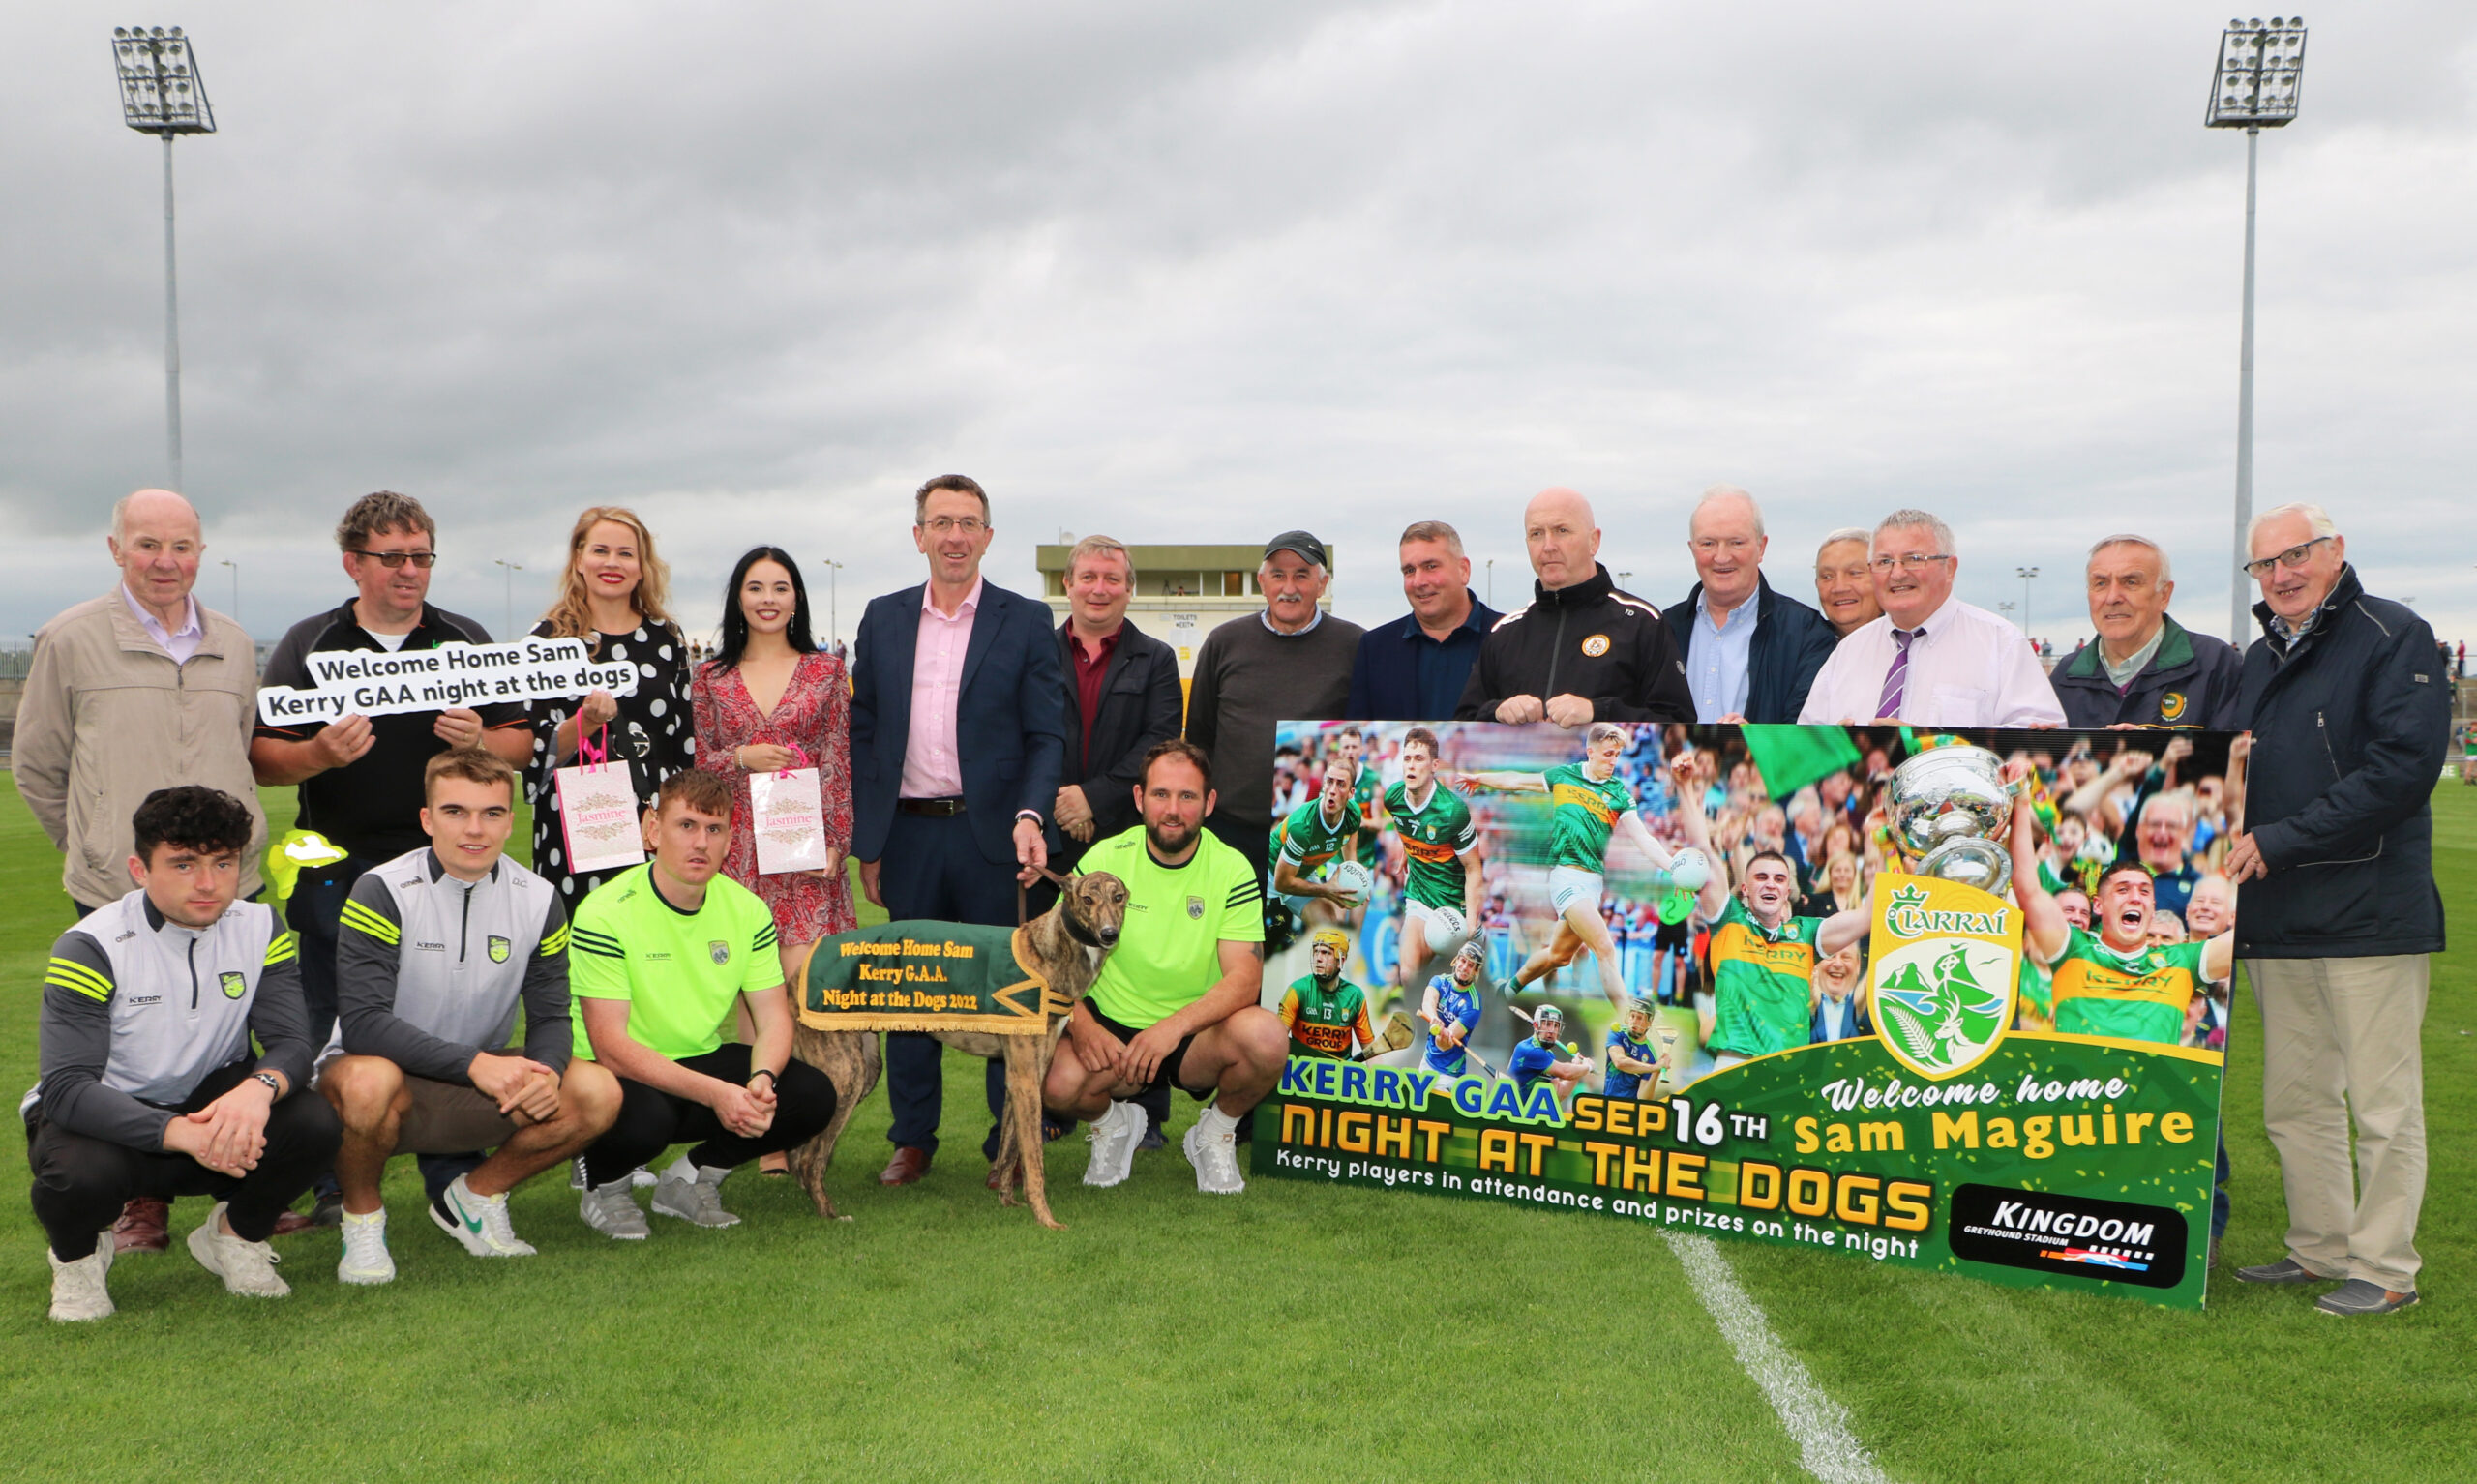 Kerry GAA - Welcome Home Sam Night at Dogs Launch Photo 2 scaled